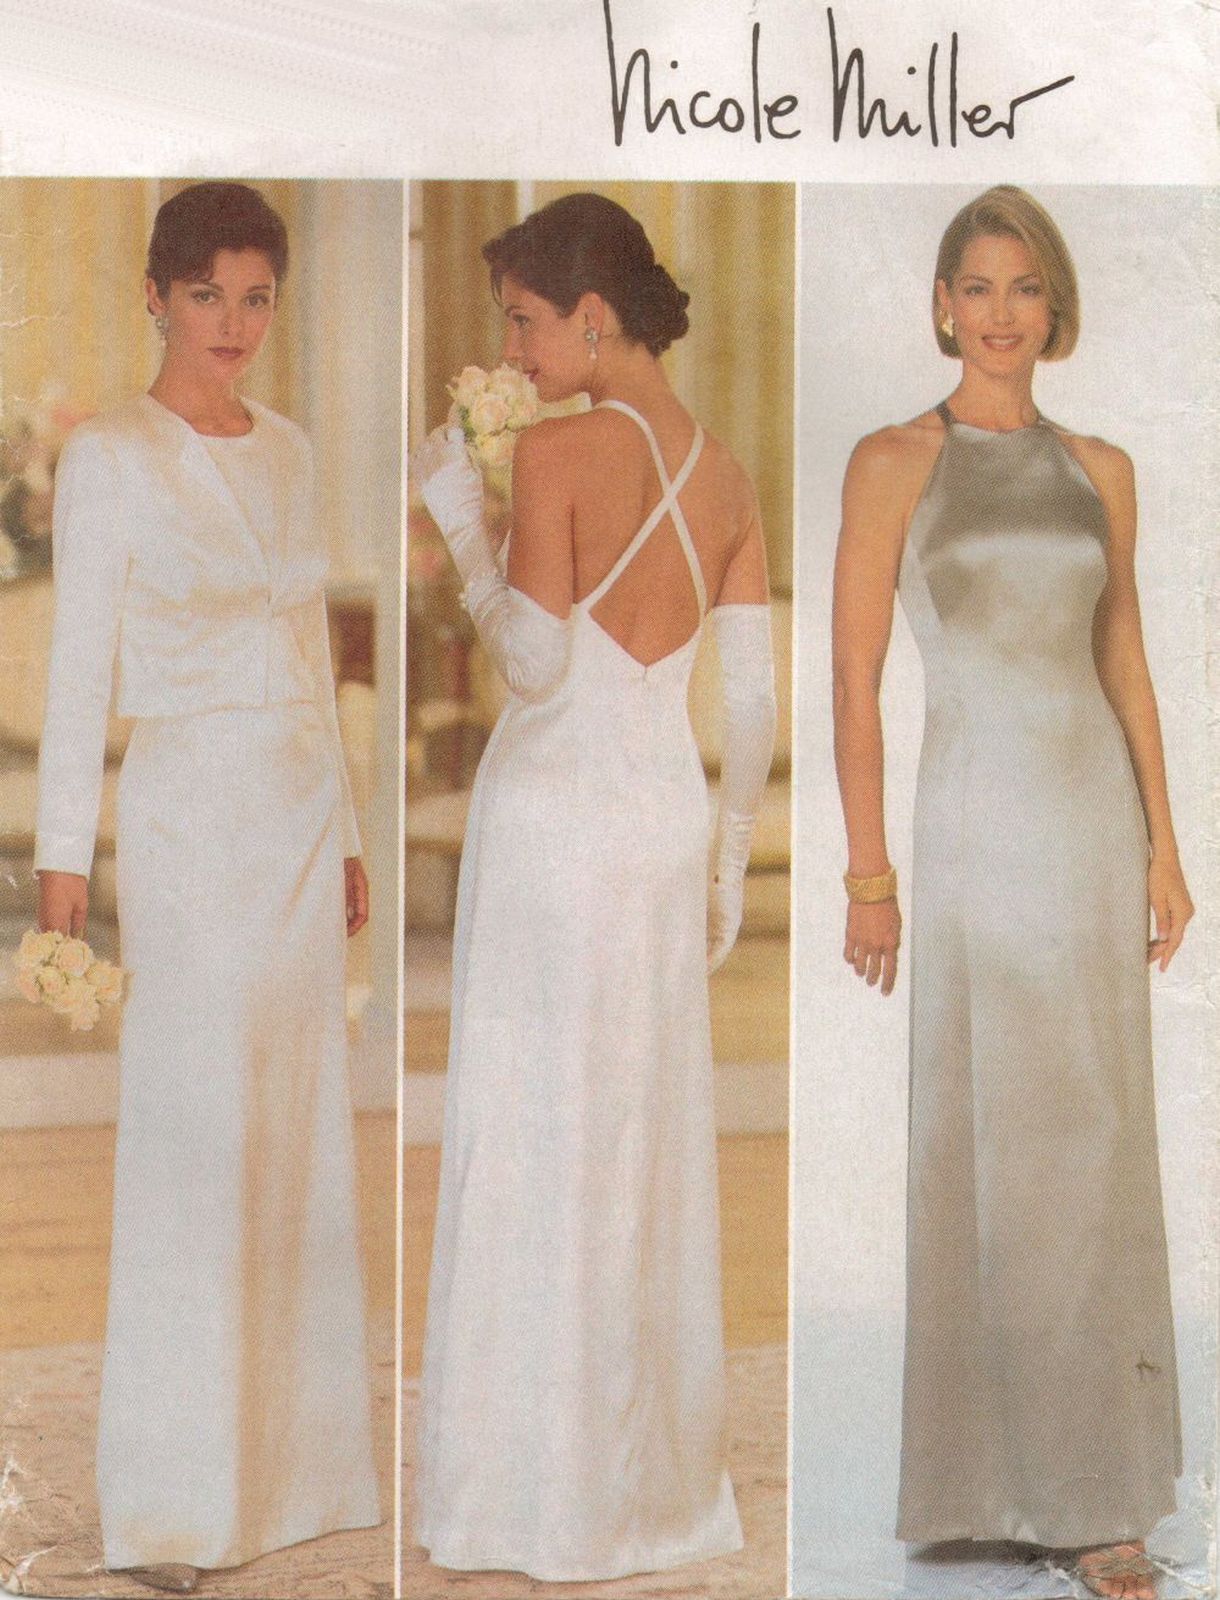 Misses Nicole Miller Prom Formal Evening Dress Gown Jacket Sew Pattern 12-16 - $12.99